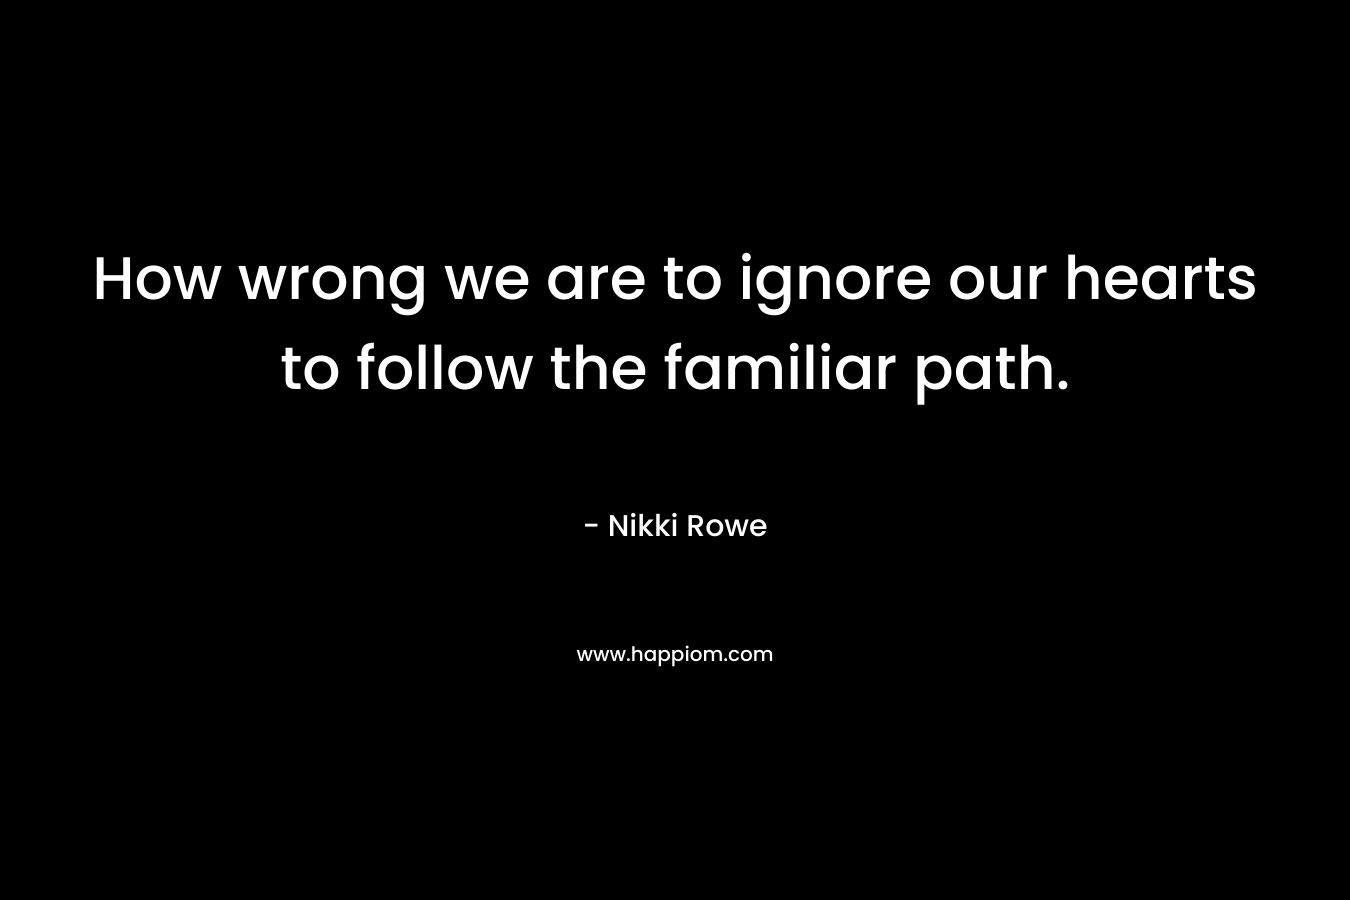 How wrong we are to ignore our hearts to follow the familiar path.